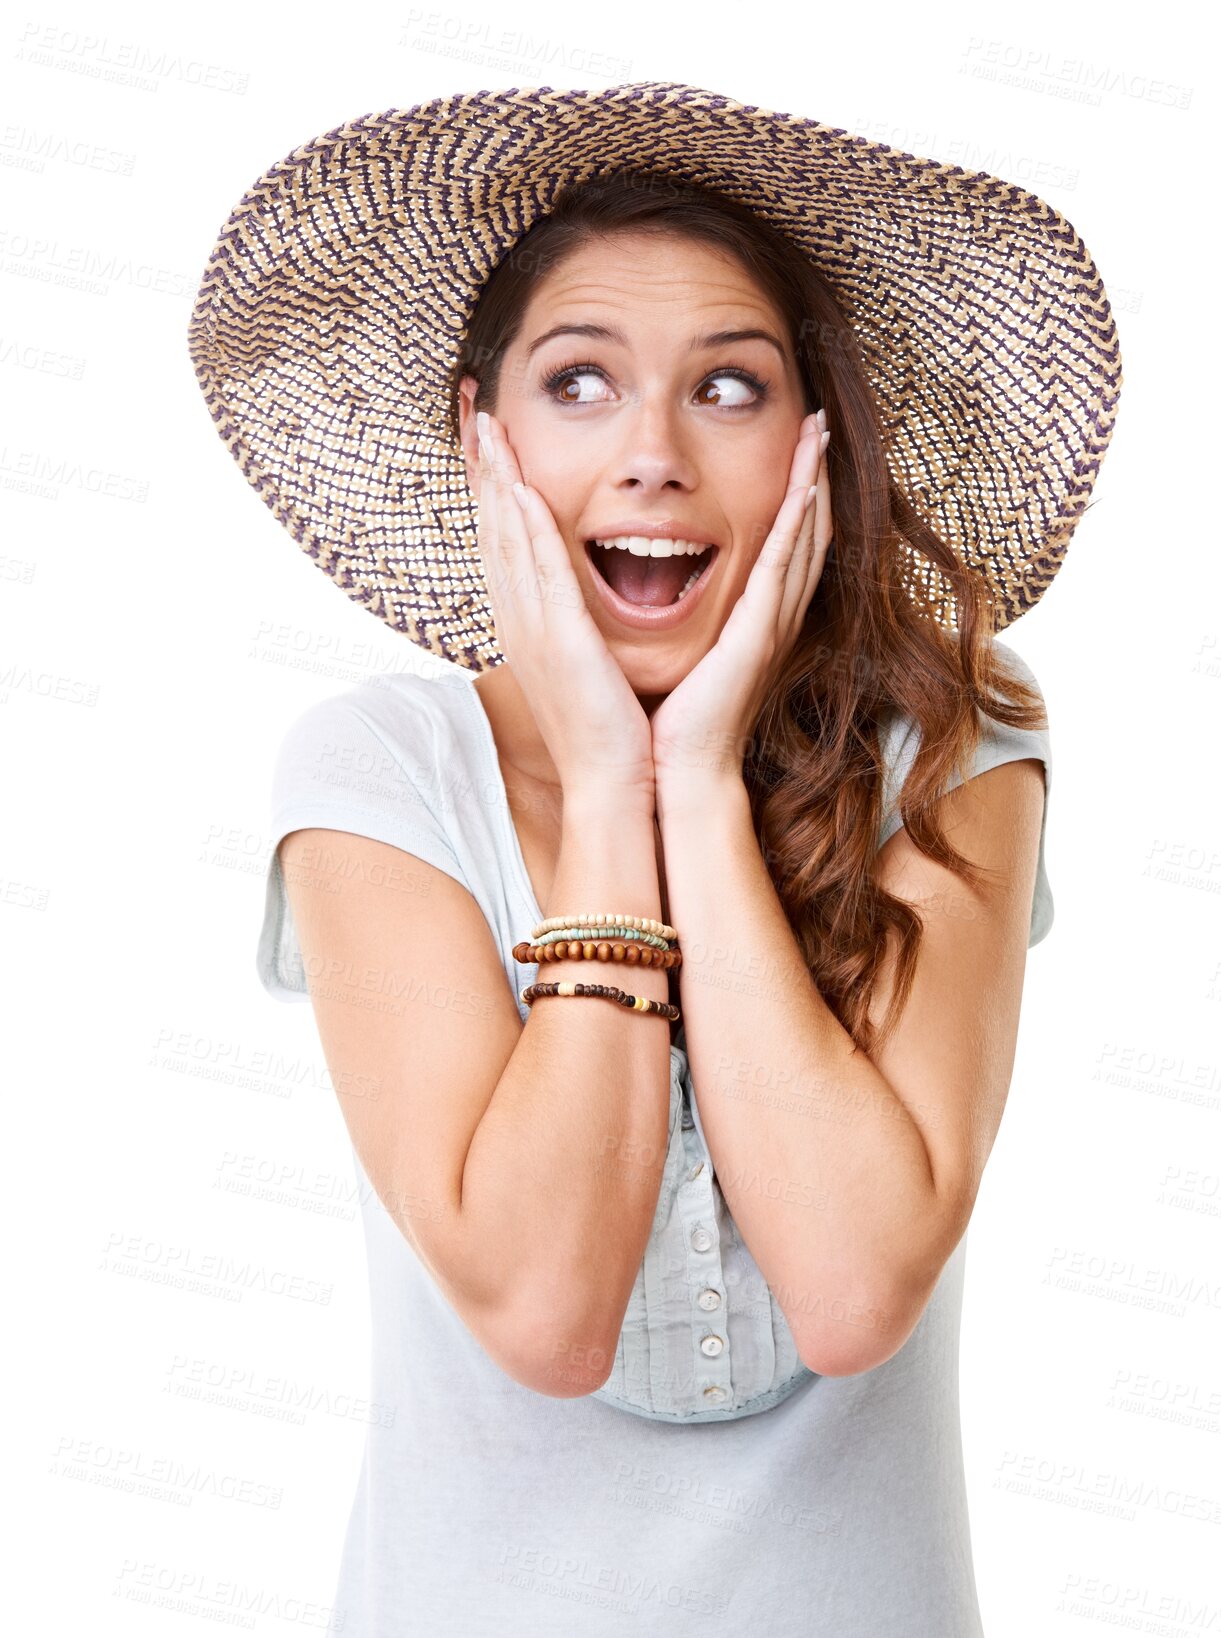 Buy stock photo Fashion, surprise and face of woman excited on png, isolated and transparent background. Emoji, winner and female person with shock, omg and wtf facial expression for discount, good news or winning